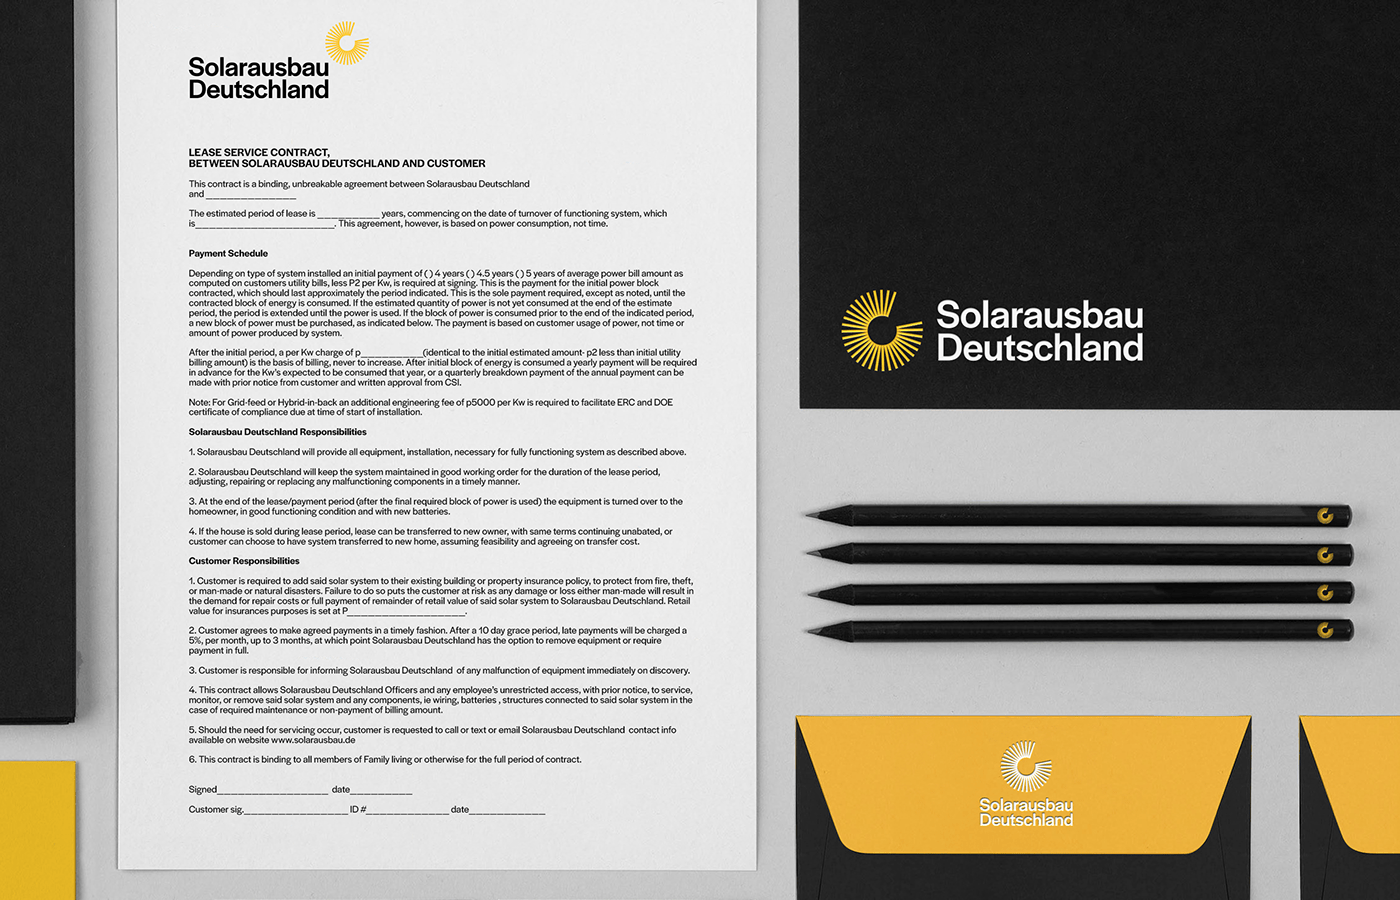 Logo and stationery design for a solar energy company in Germany